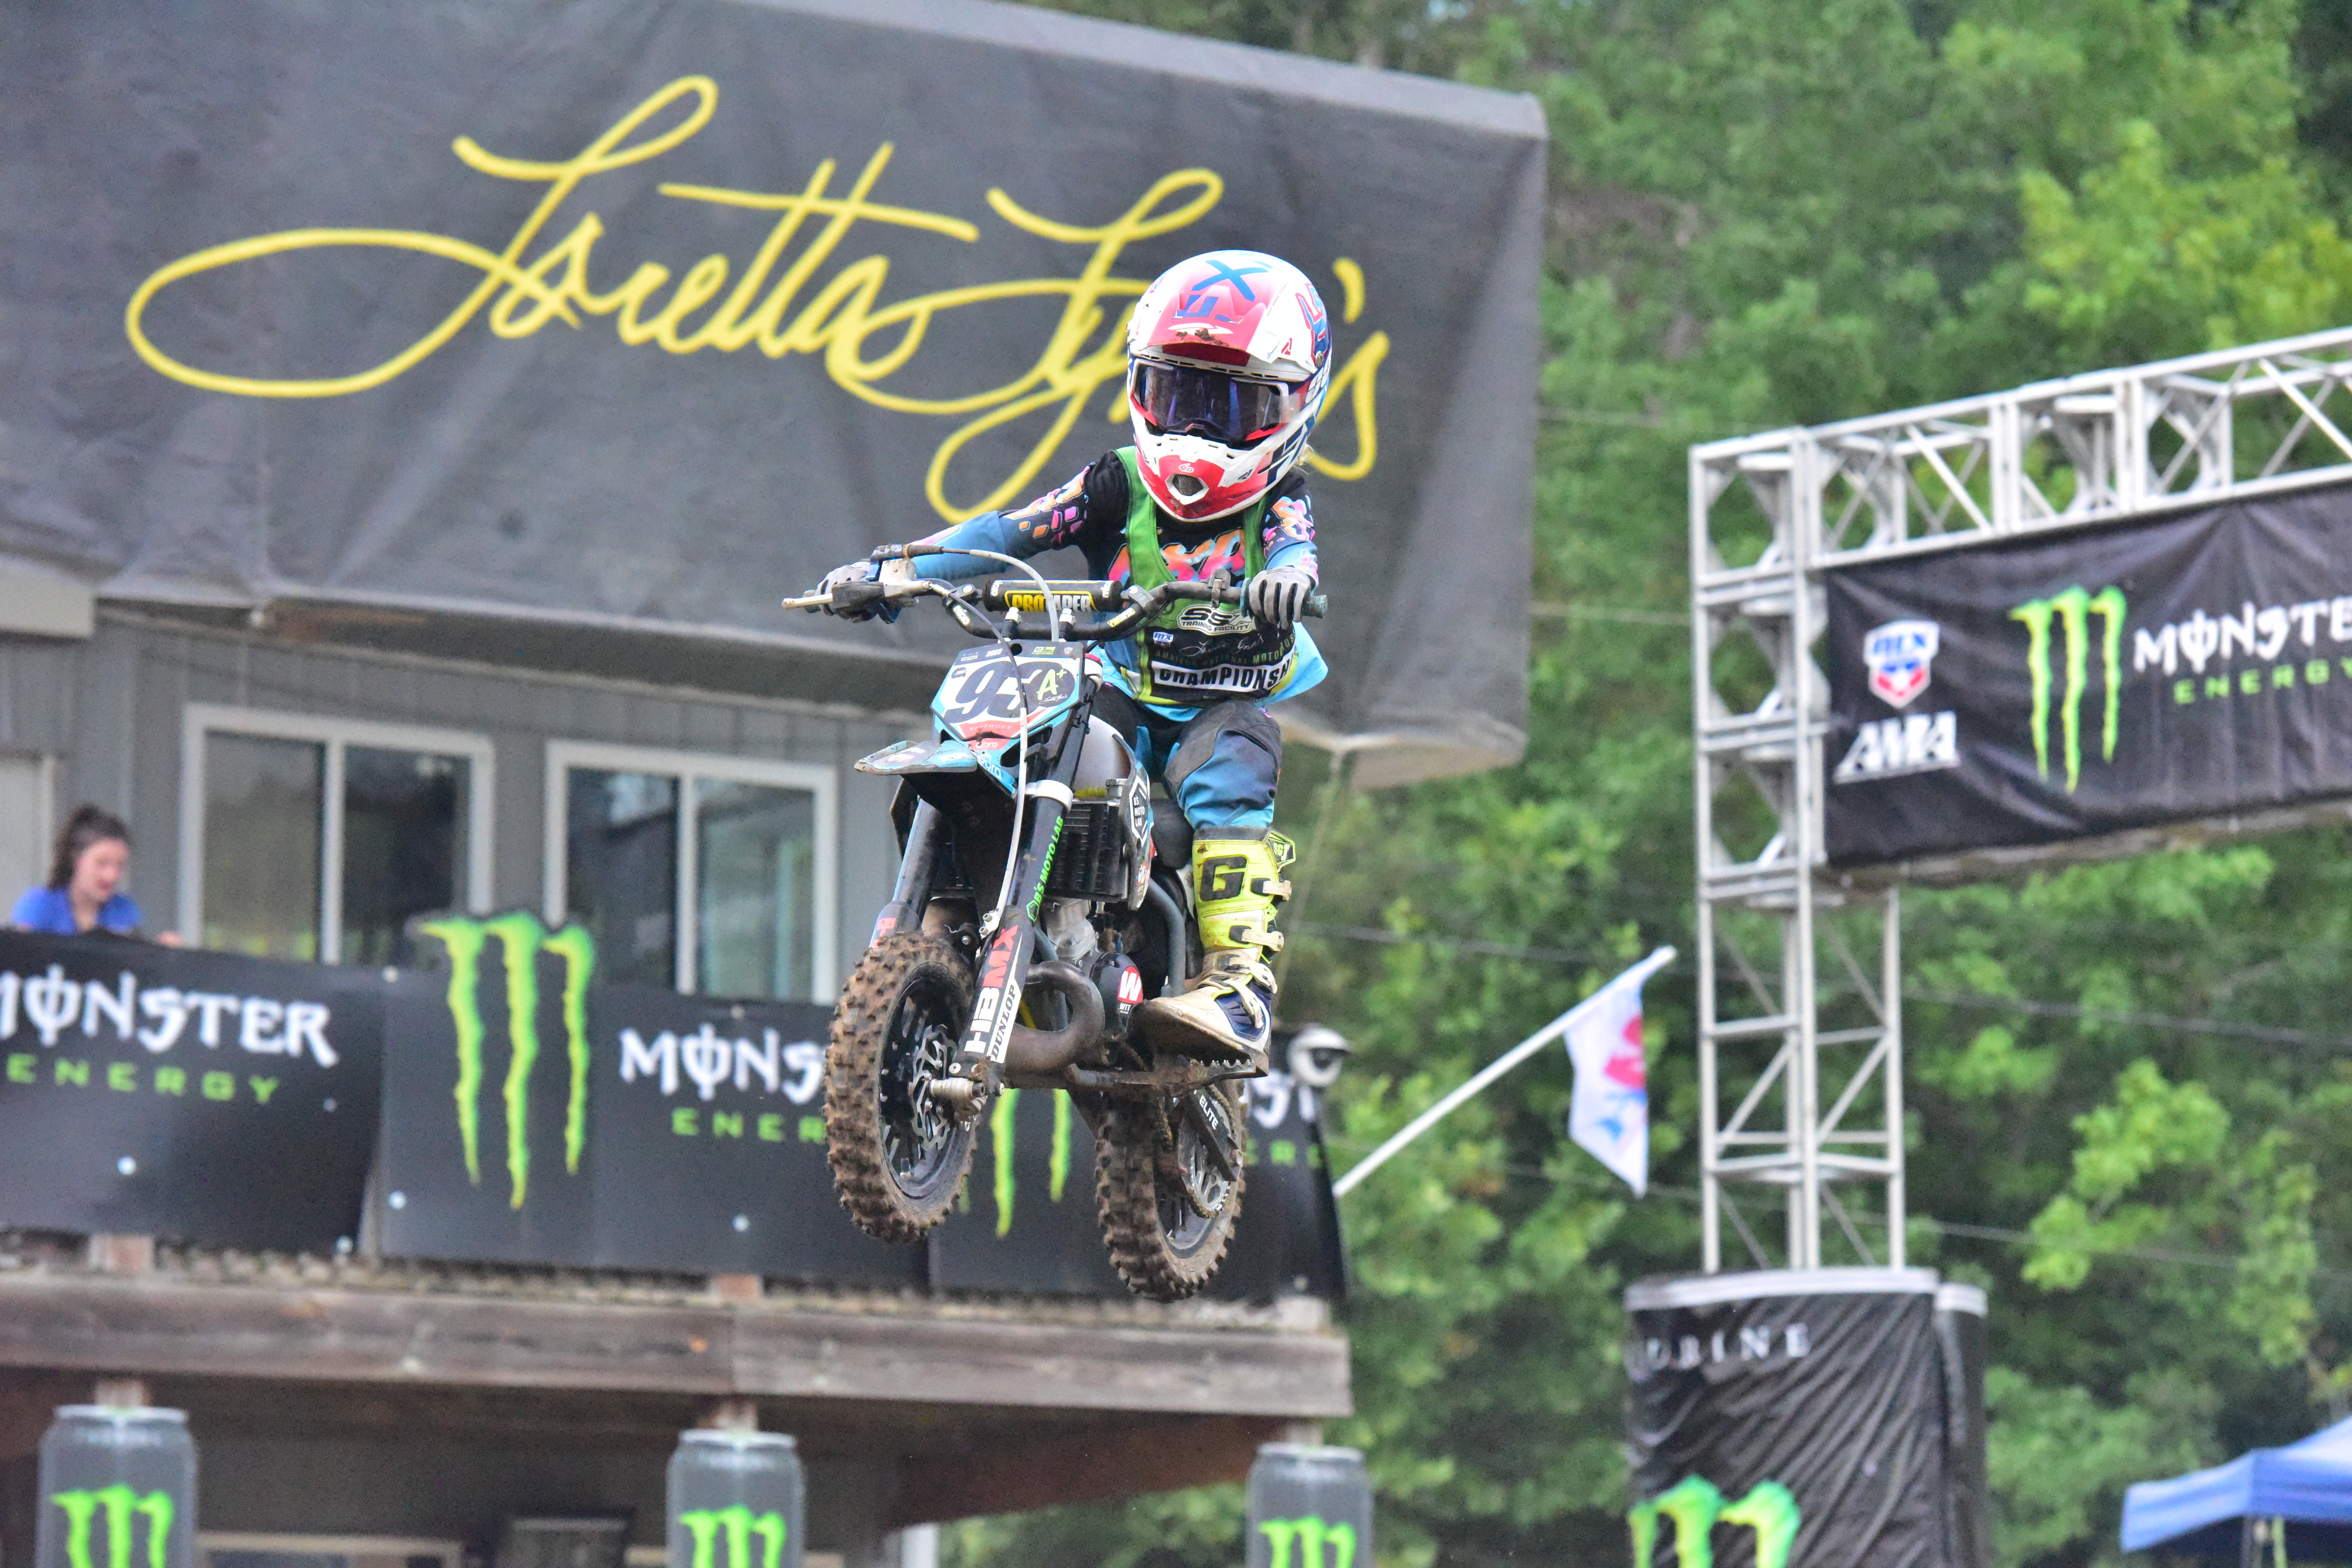 Motocross Sterling 7-year-old places 3rd at Loretta Lynns amateur nationals